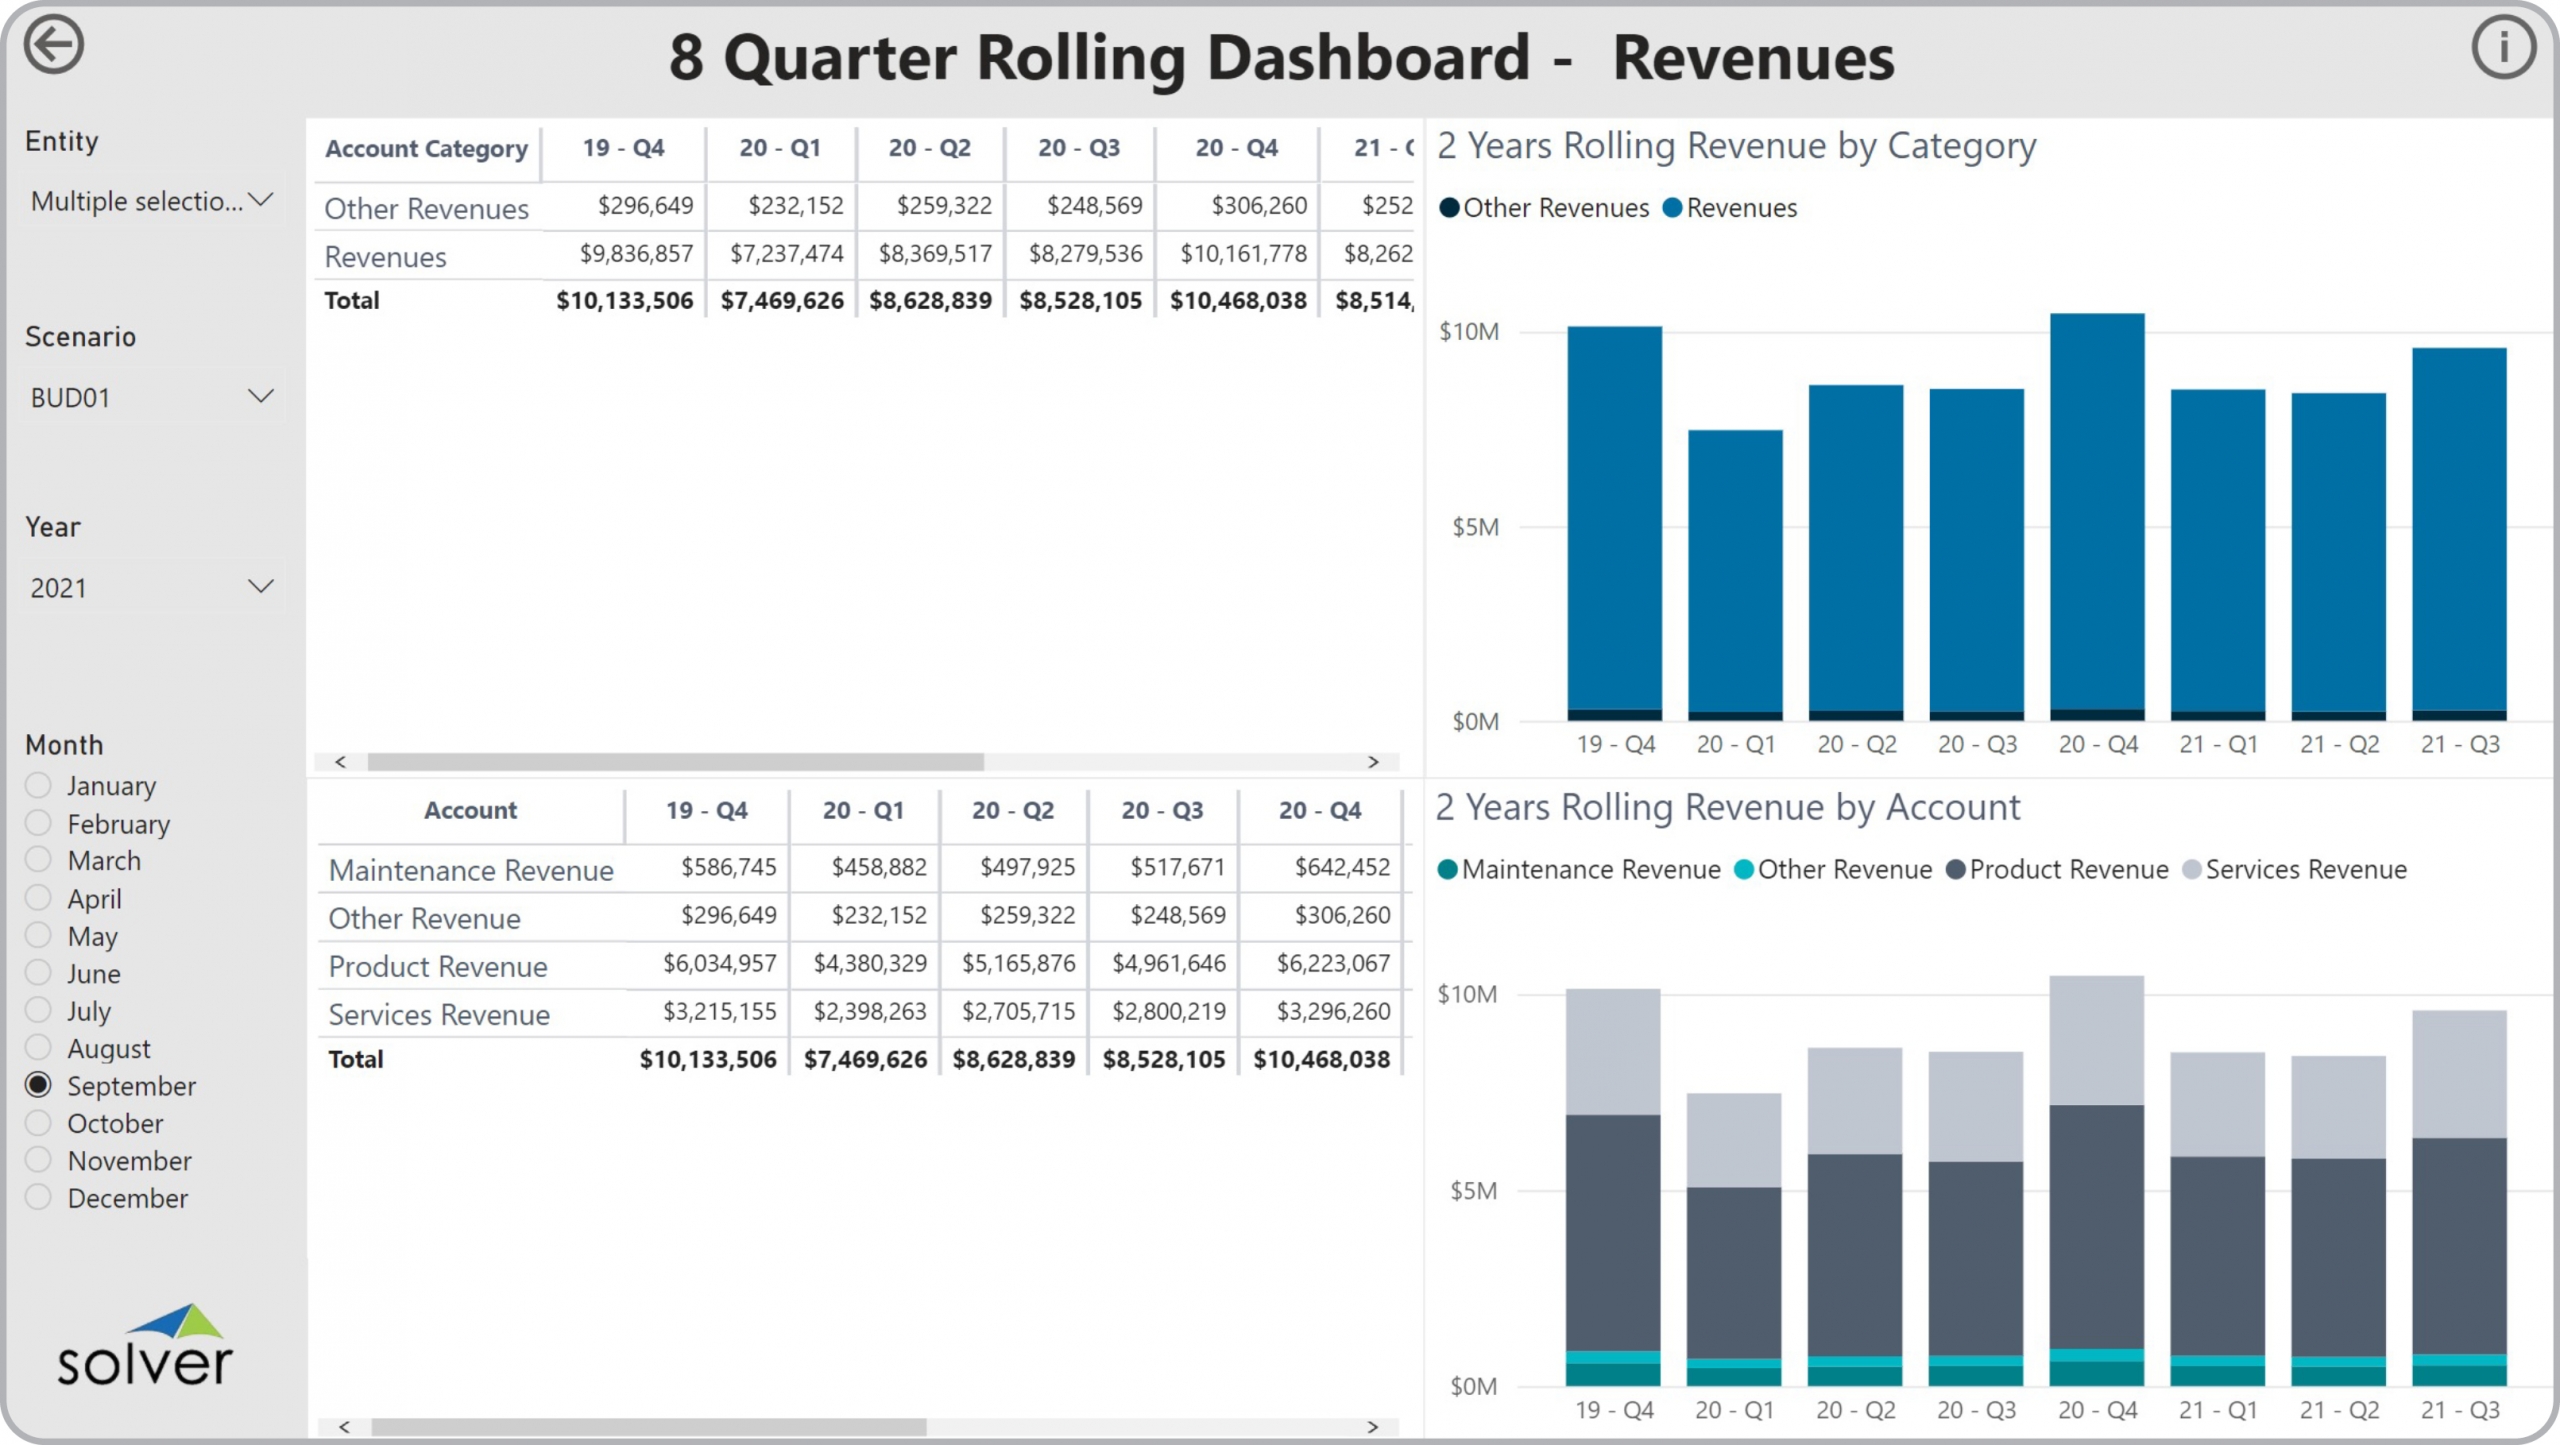 Example of a 8 Quarter Rolling Revenue Dashboard to Streamline the Monthly Reporting Process